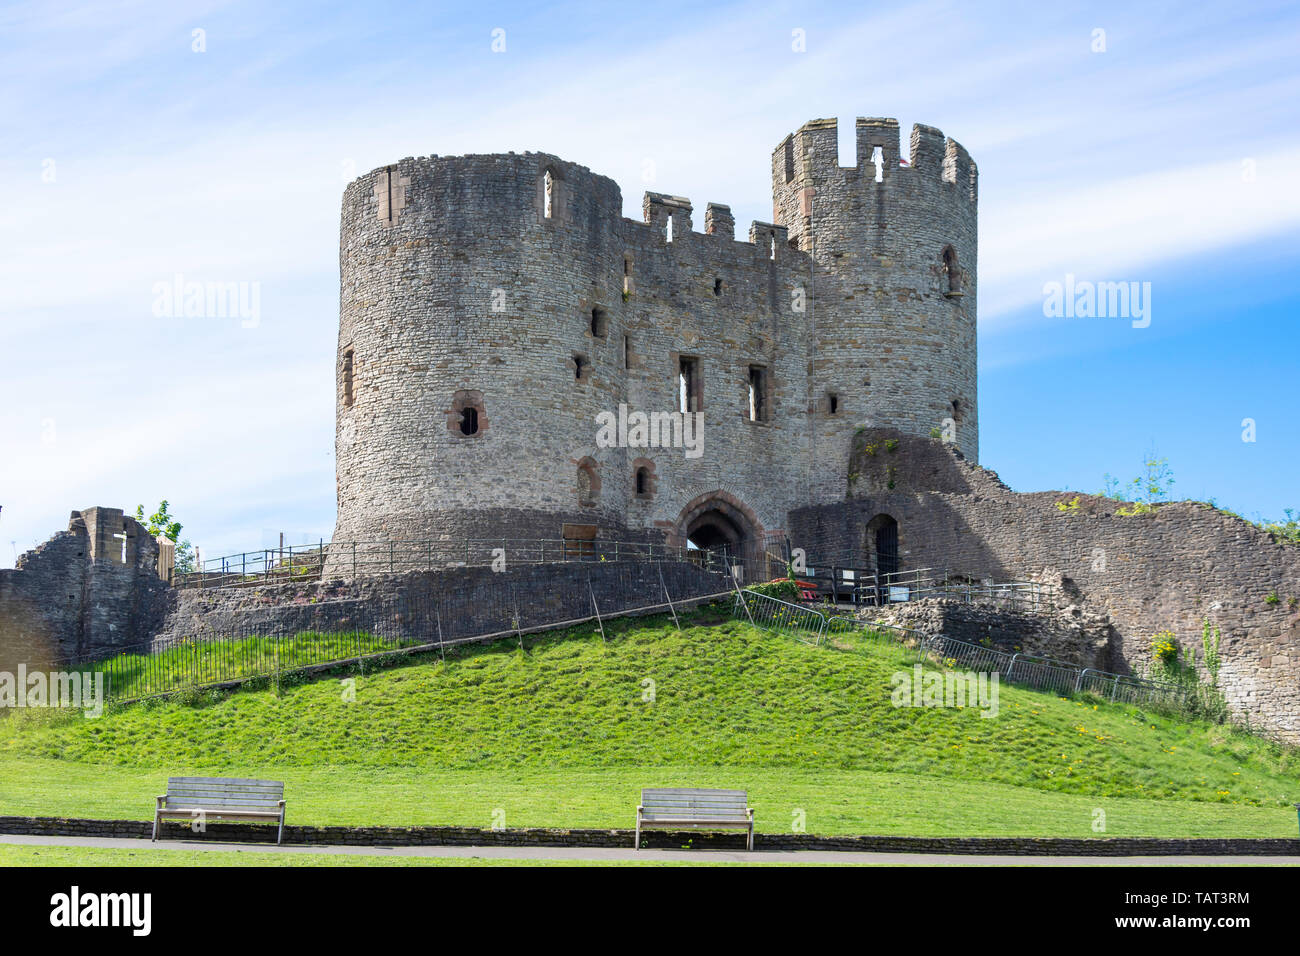 The Keep inside Dudley Castle, Castle Hill, Dudley, West Midlands, England, United Kingdom Stock Photo